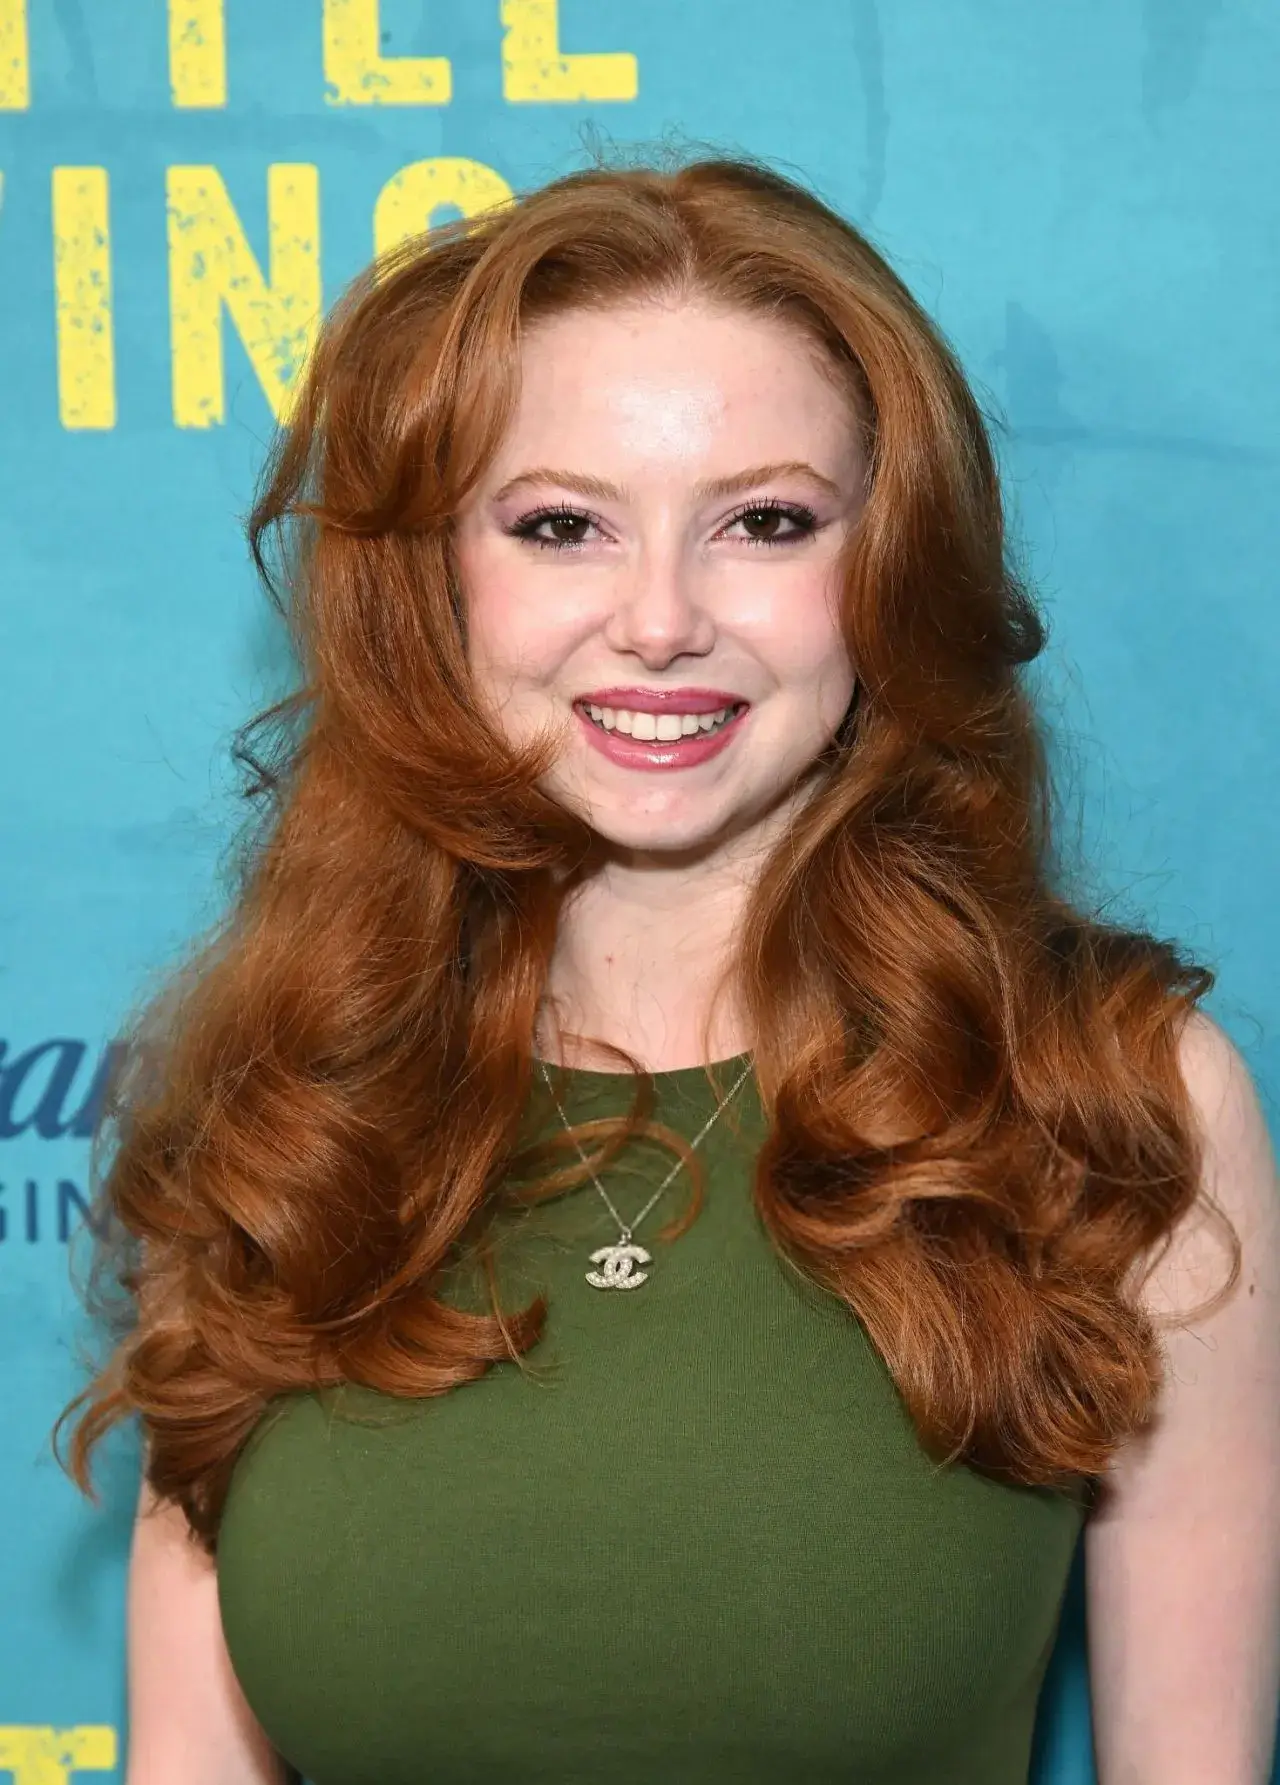 FRANCESCA CAPALDI AT LITTLE WING SCREENING EVENT AND RED CARPET 1